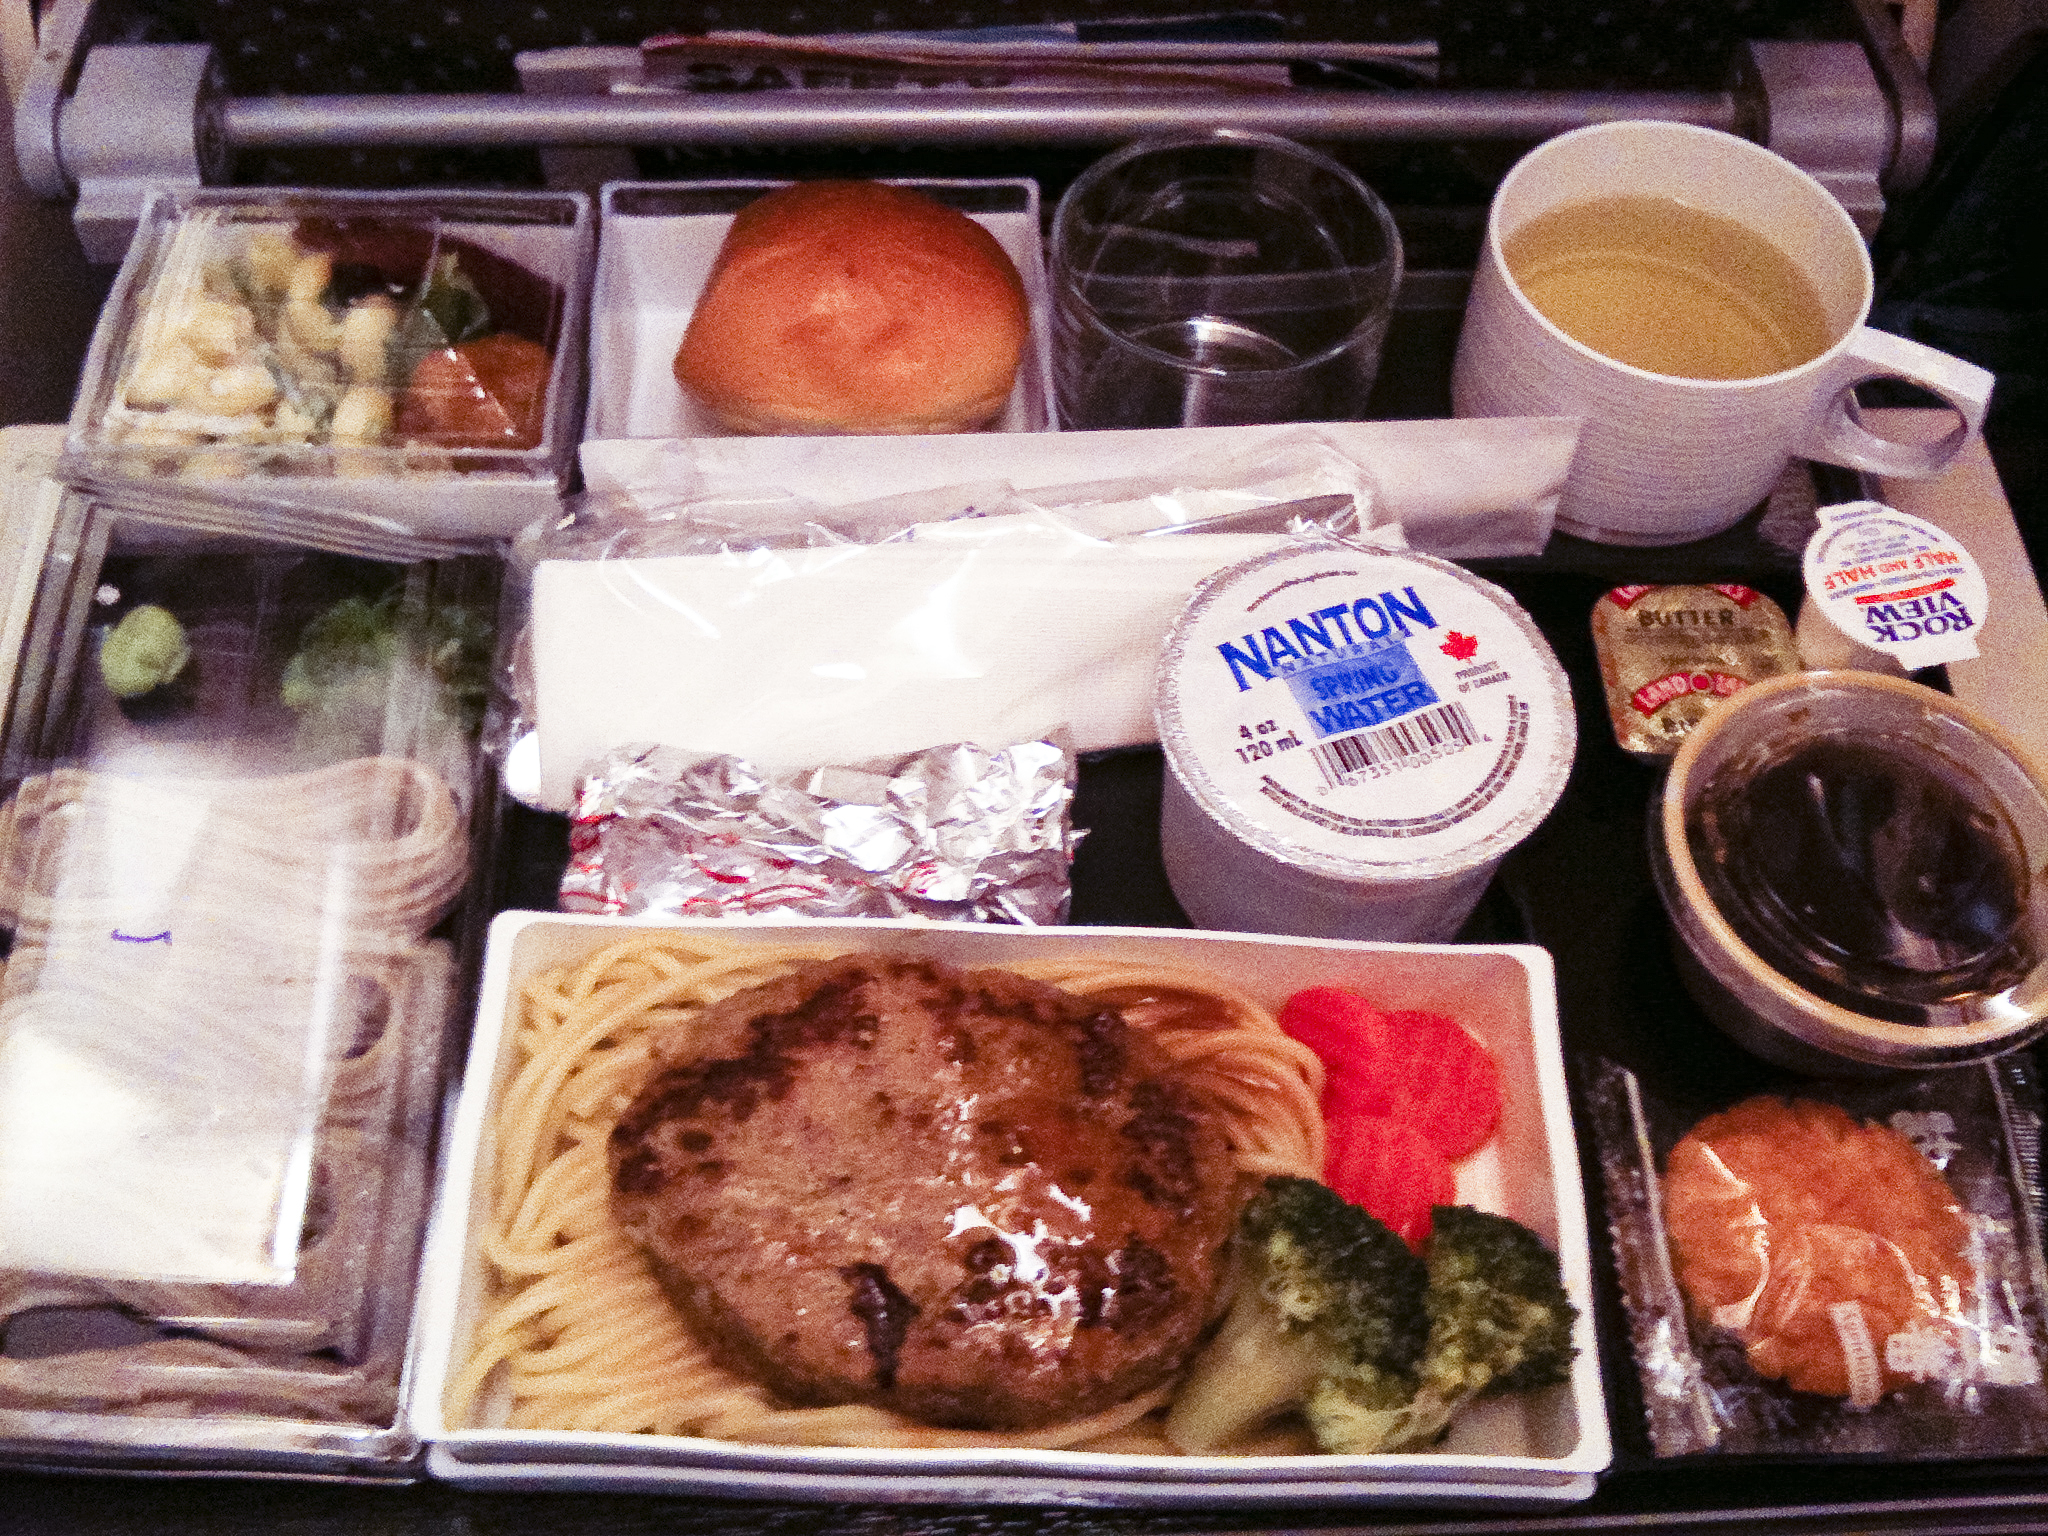 Dinner at the Singapore Airline plane from USA to Singapore.